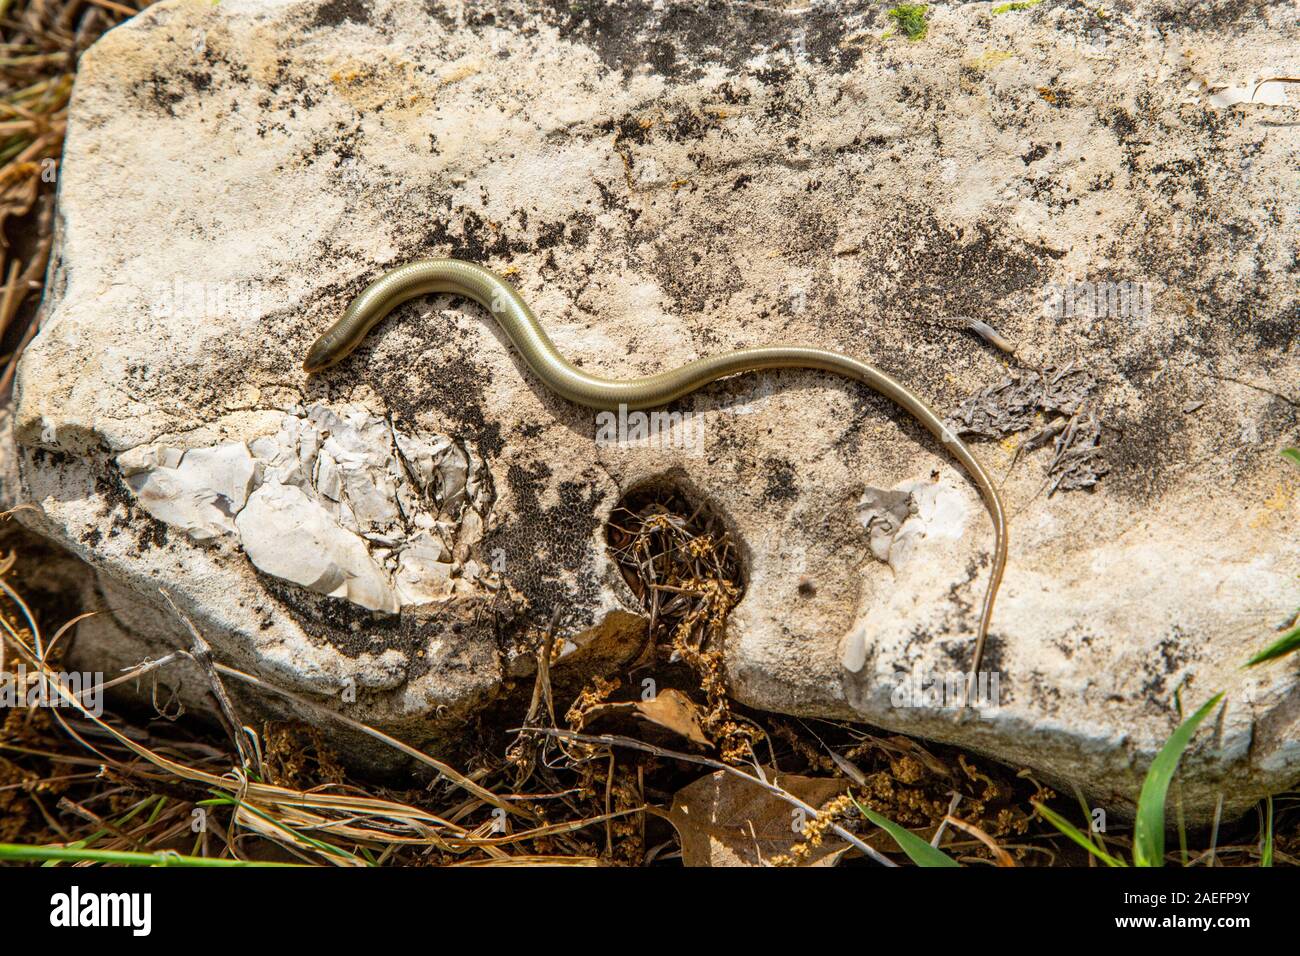 Chalcides guentheri, or Gunther's Cylindrical Skink, is a species of skink found in Israel, Lebanon, and parts of western Jordan and Syria. It is usua Stock Photo